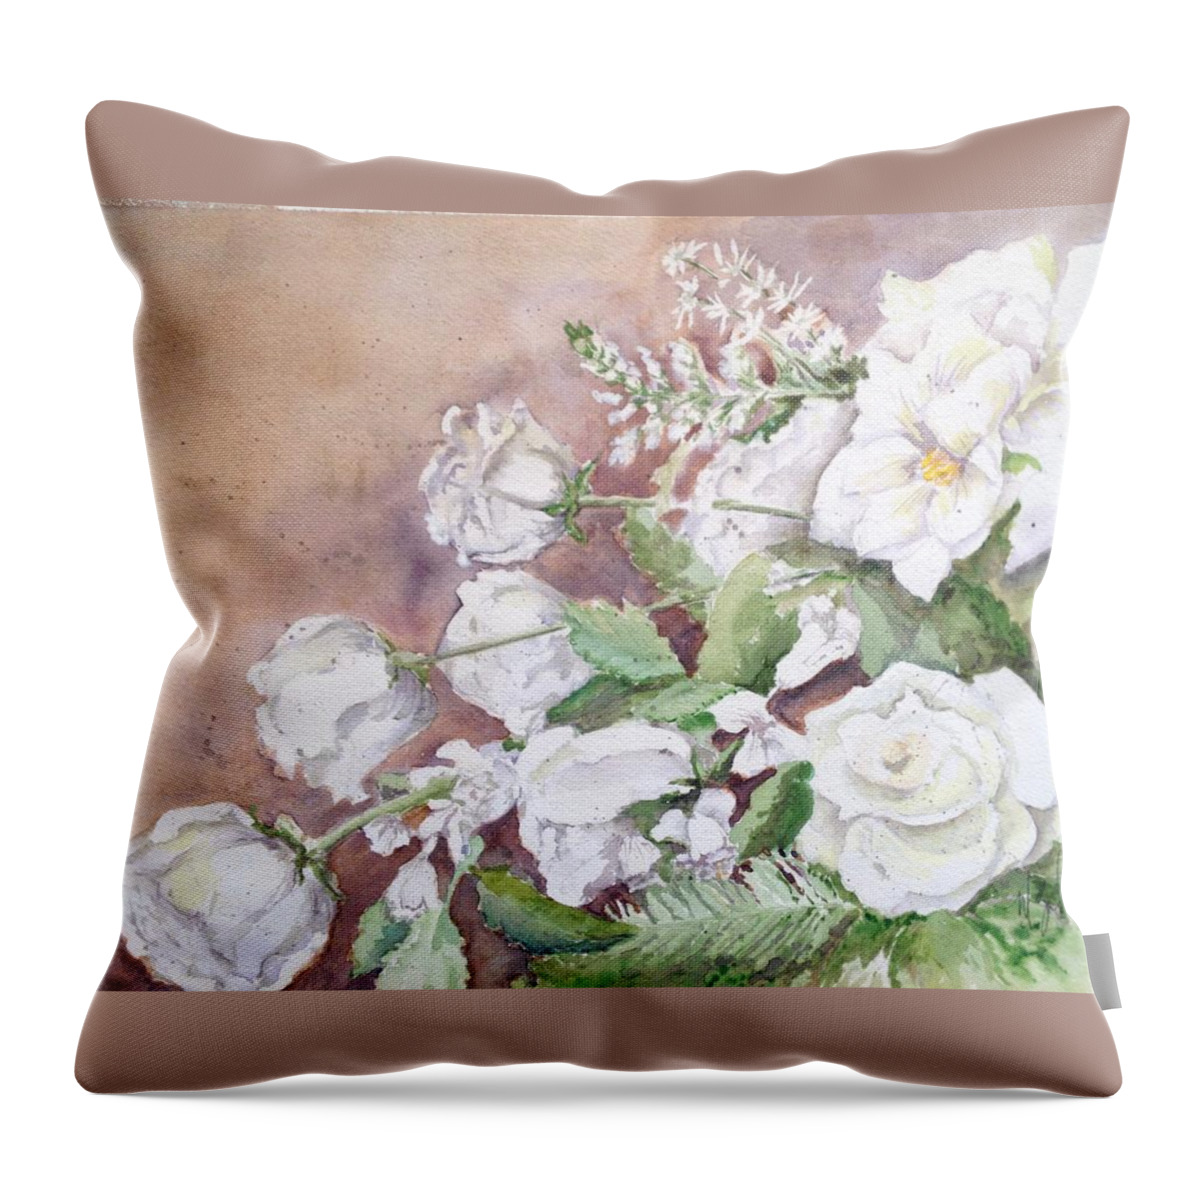 Water Color Throw Pillow featuring the painting Justin's Flowers by Marilyn Zalatan